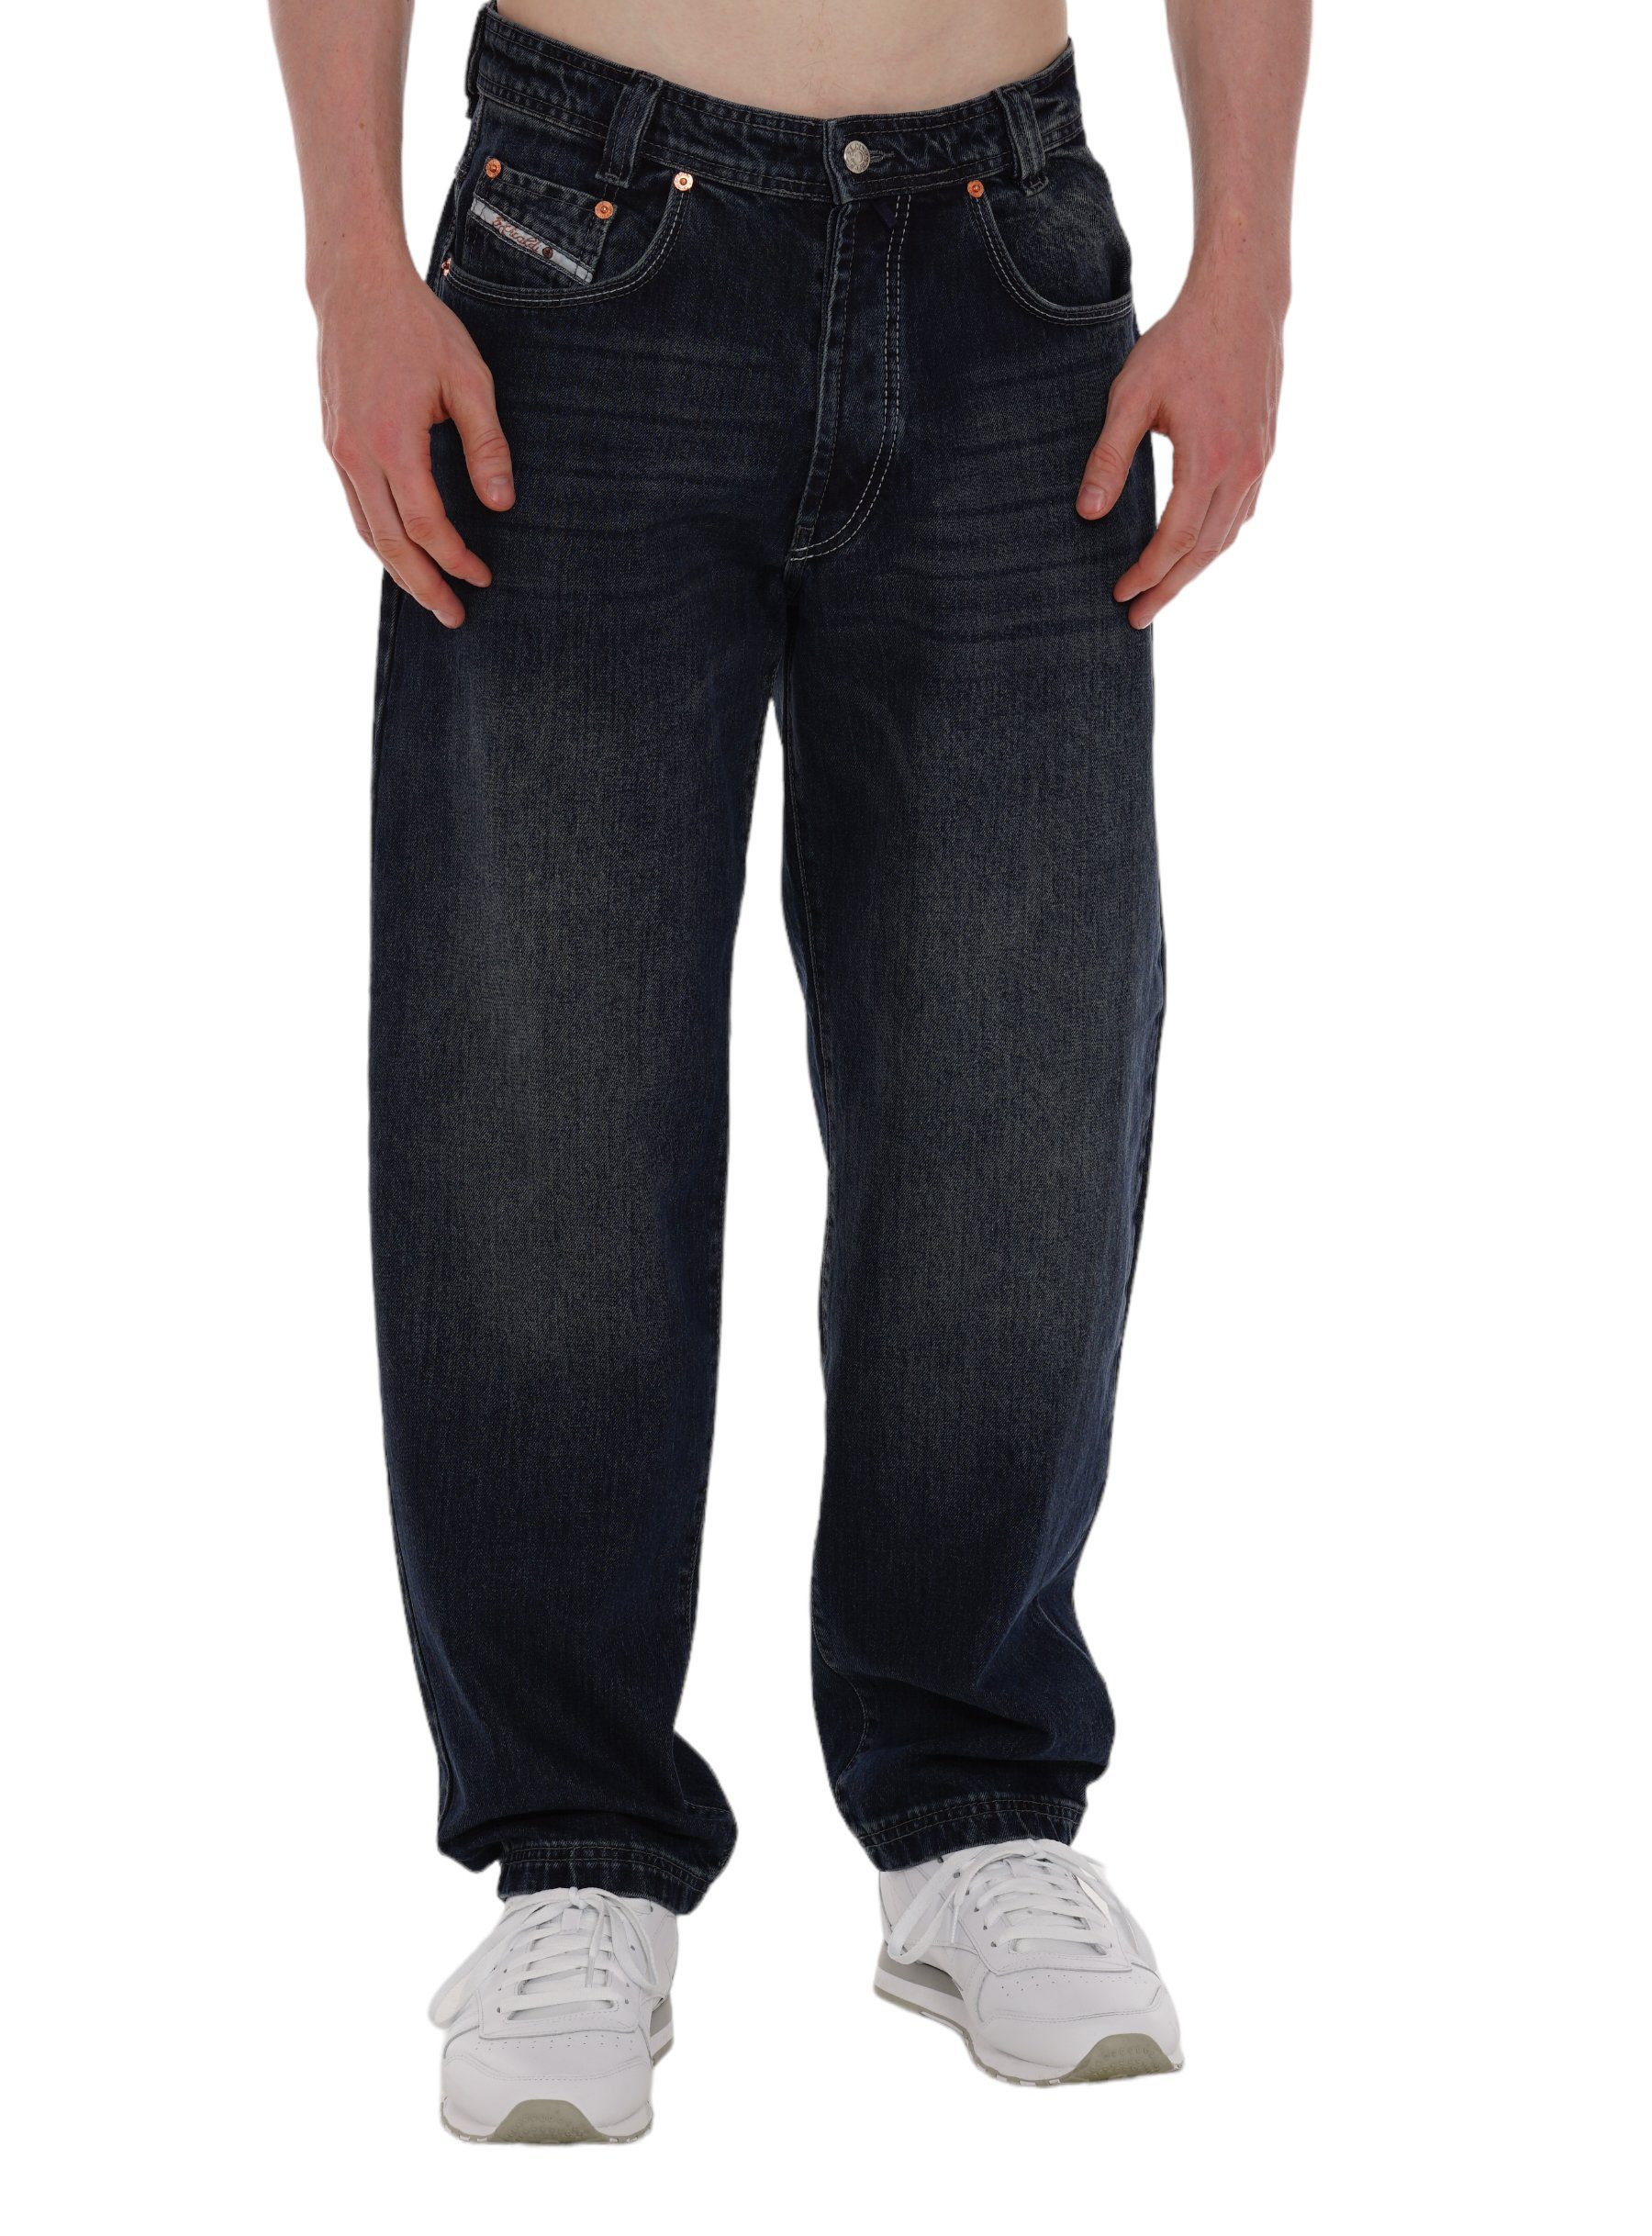 Jeans Pocket Loose Fit, PICALDI Miracle Jeans 471 Zicco Five Weite Jeans